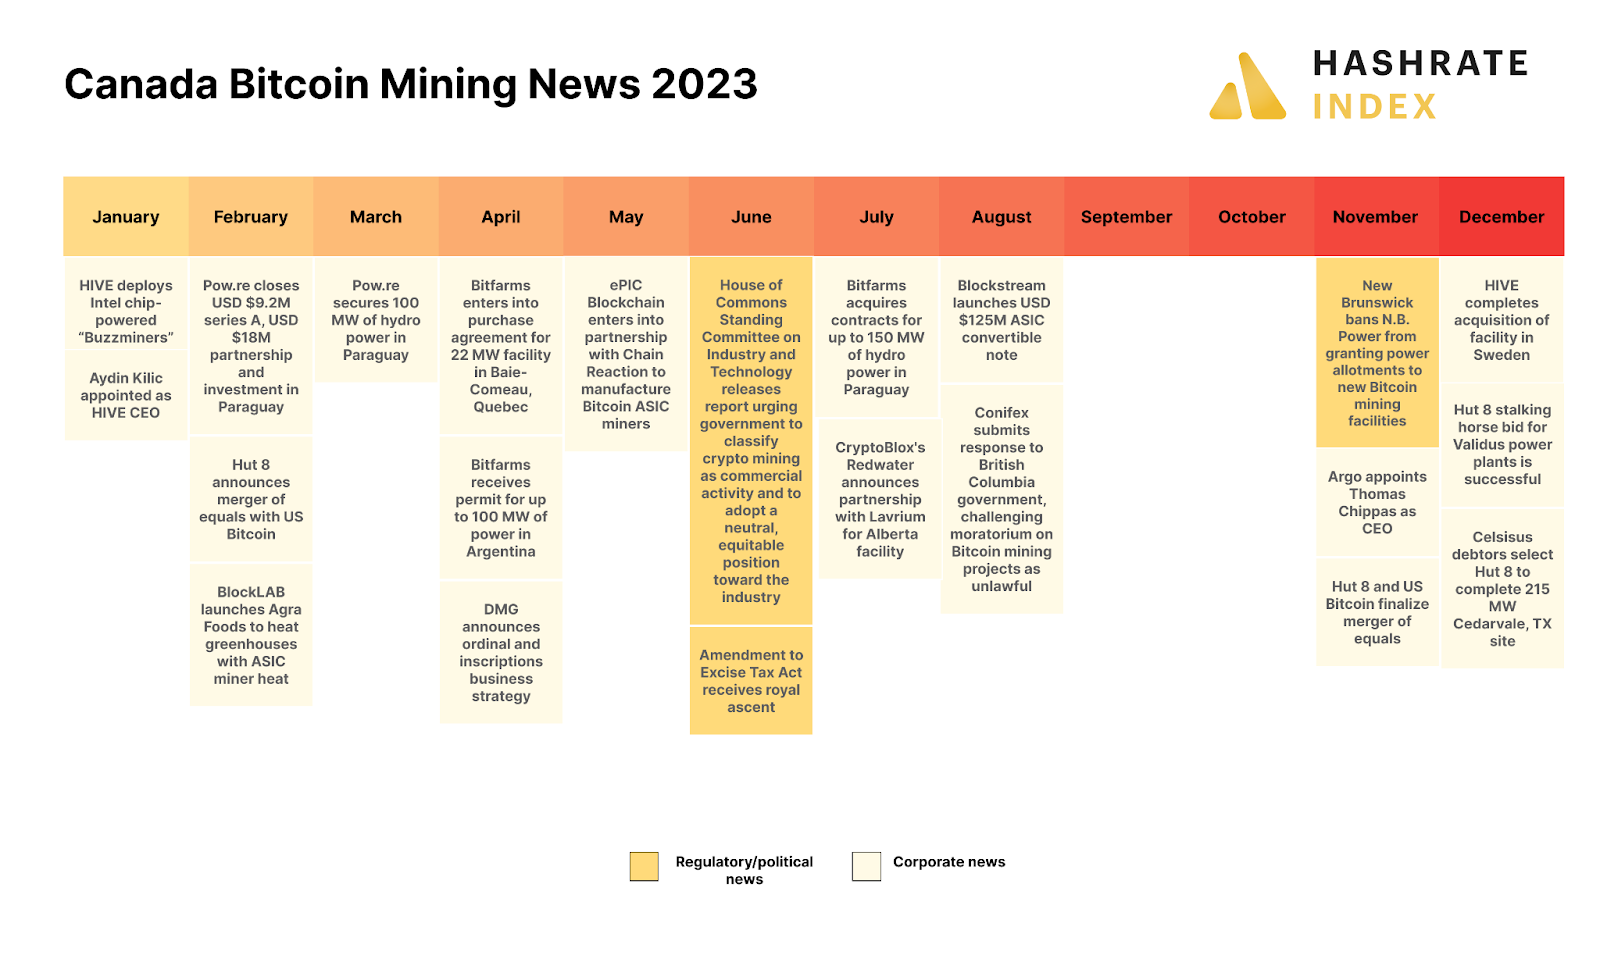 Bitcoin Mining News in Canada in 2023 | Source: Various news sites, government agencies 